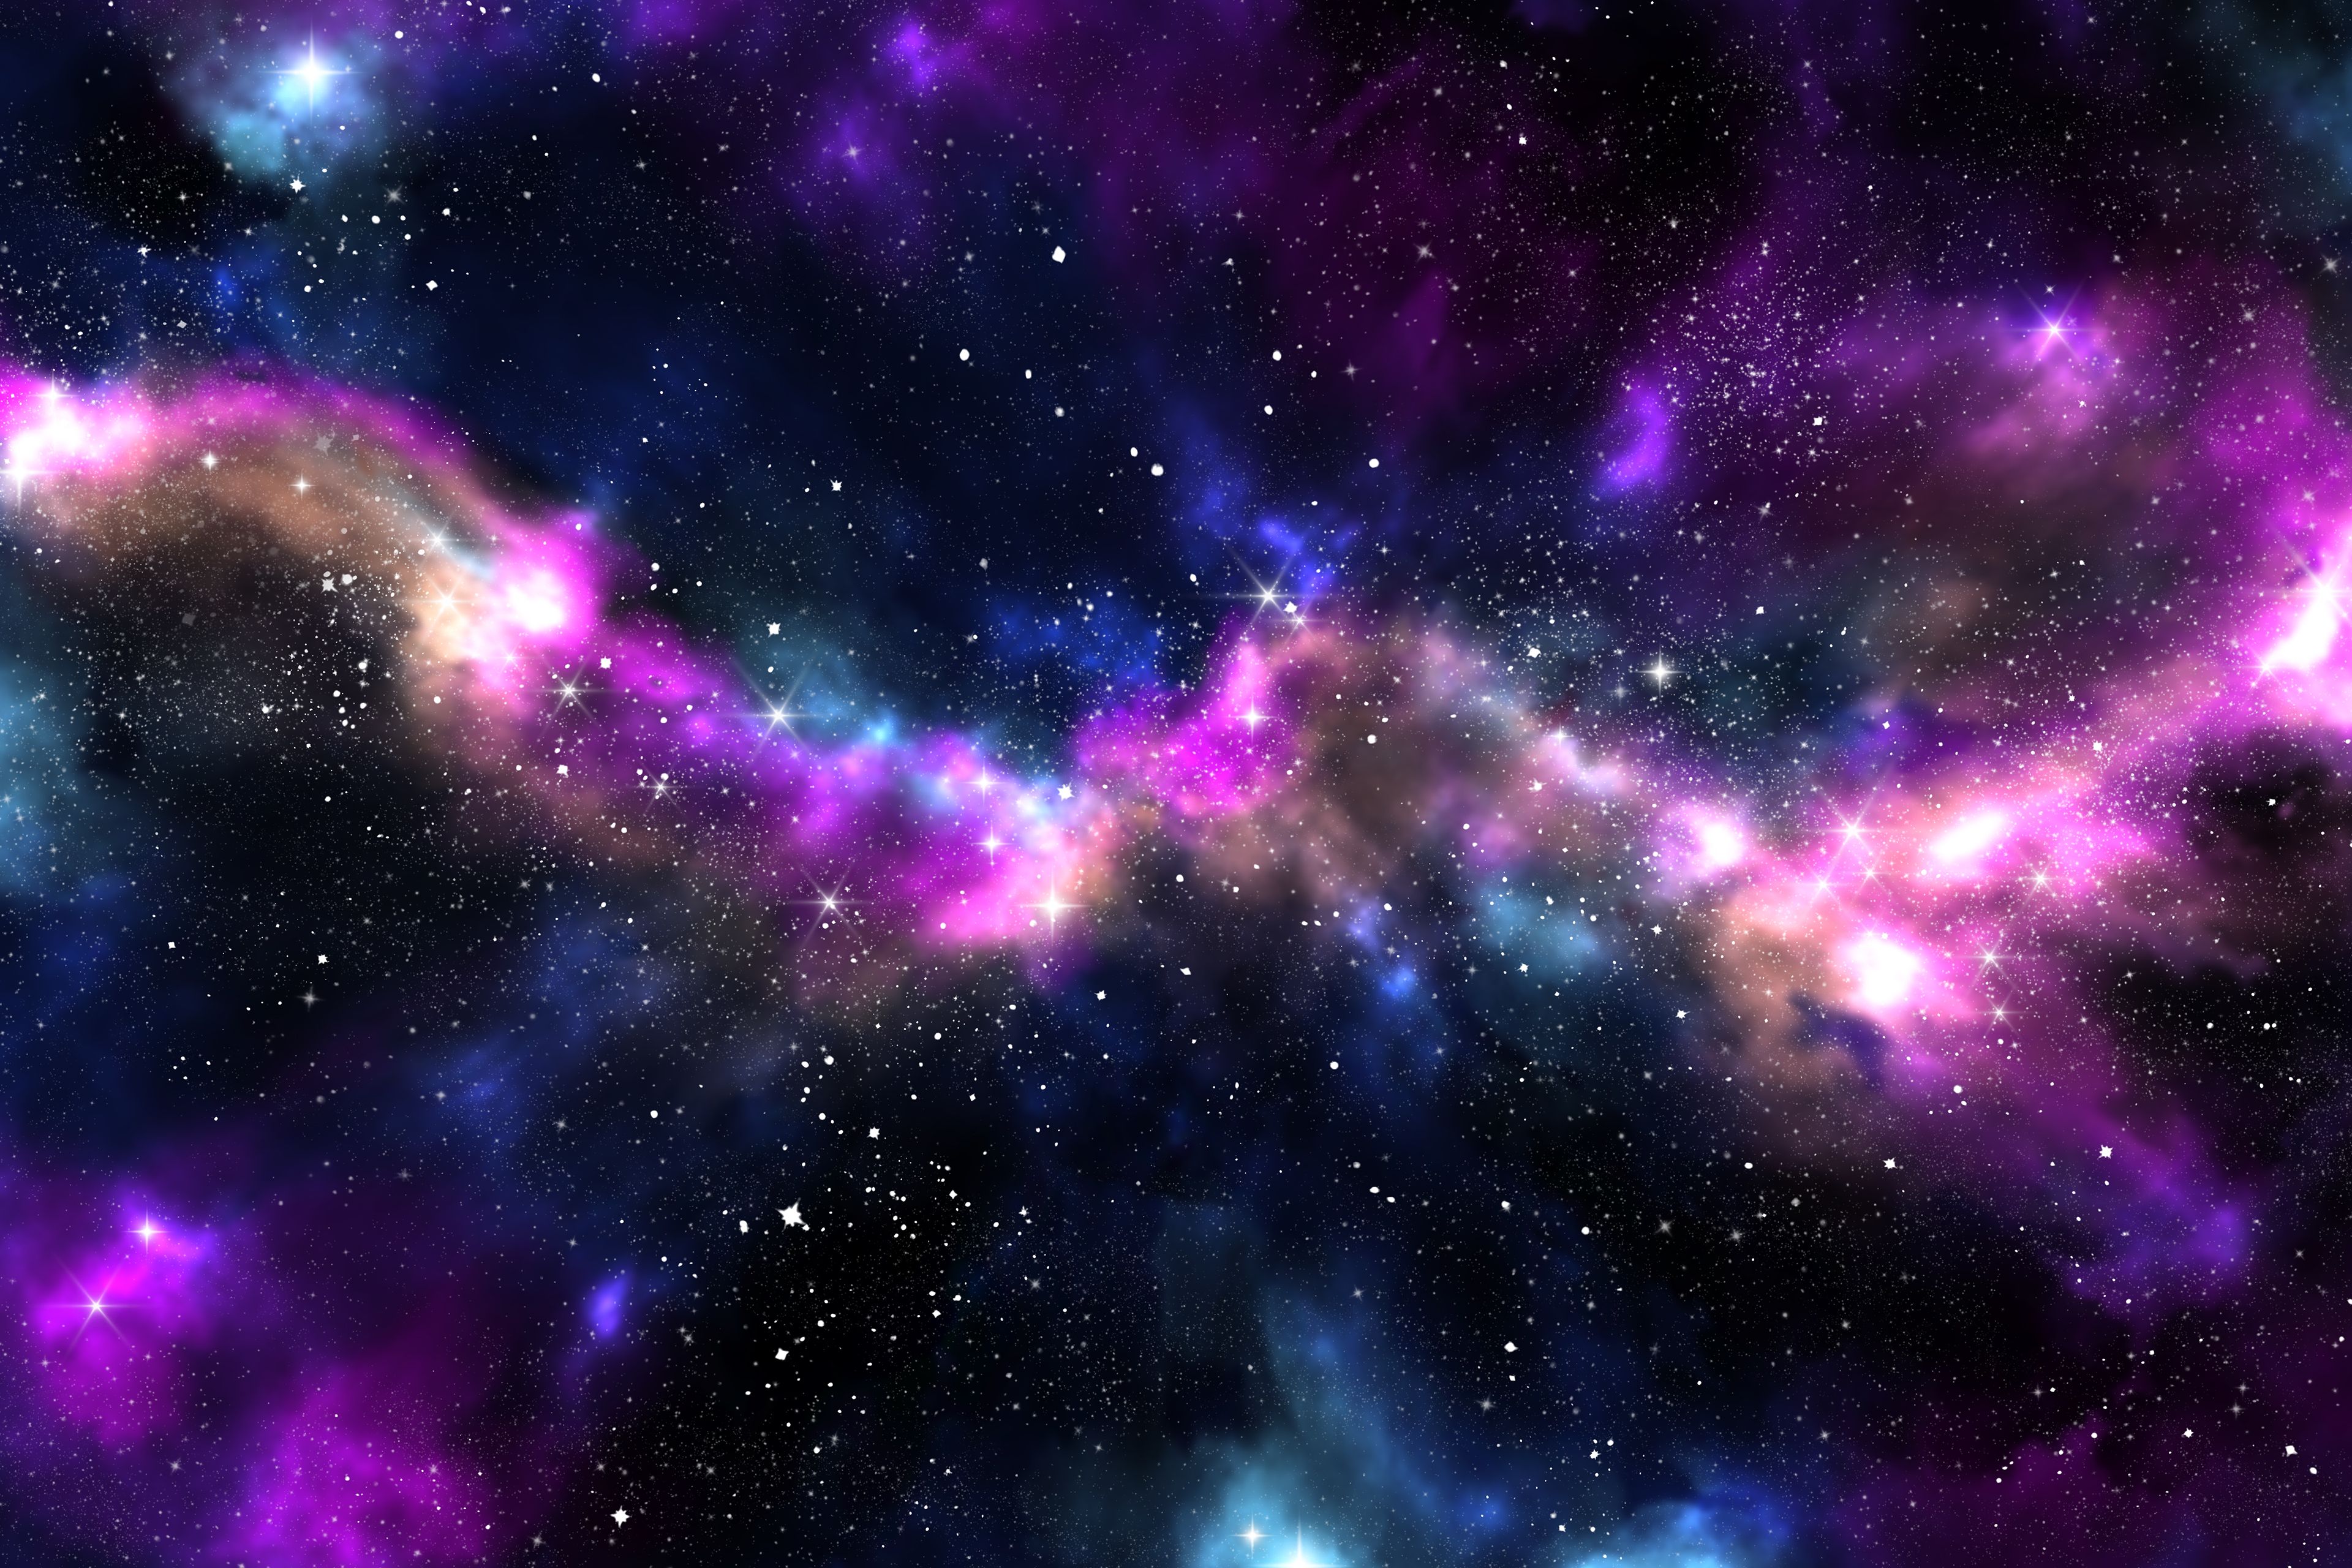 Outer Space Galaxy Wallpapers 4k Hd Outer Space Galaxy Backgrounds On Wallpaperbat 